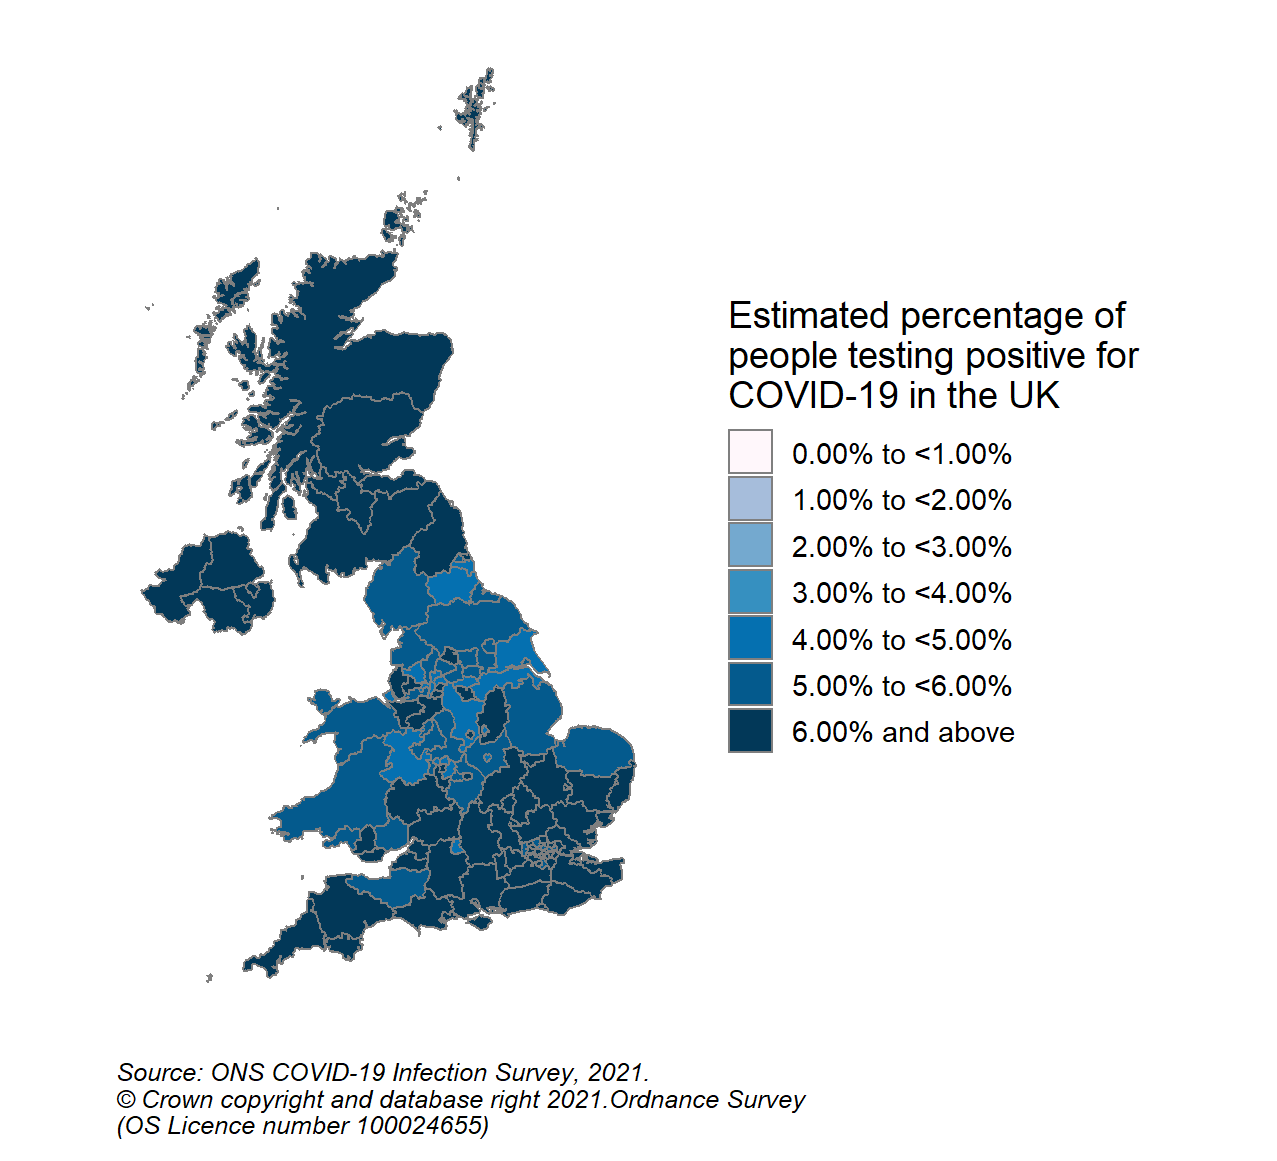 This colour coded map of the UK shows the modelled estimates of the percentage of the private residential population testing positive for COVID-19, by COVID-19 Infection Survey sub-regions. In Scotland, these sub-regions are comprised of Health Boards. The regions are: 123 - NHS Grampian, NHS Highland, NHS Orkney, NHS Shetland and NHS Western Isles, 124 - NHS Fife, NHS Forth Valley and NHS Tayside, 125 - NHS Greater Glasgow & Clyde, 126 - NHS Lothian, 127 - NHS Lanarkshire, 128 - NHS Ayrshire & Arran, NHS Borders and NHS Dumfries & Galloway.  The sub-region with the highest modelled estimate for the percentage of people testing positive was CIS Region 127 (NHS Lanarkshire) at 10.71% (95% credible interval: 9.05% to 12.66%).  The sub-region with the lowest modelled estimate was CIS Region 126 (NHS Lothian), at 7.35% (95% credible interval: 6.23% to 8.69%).